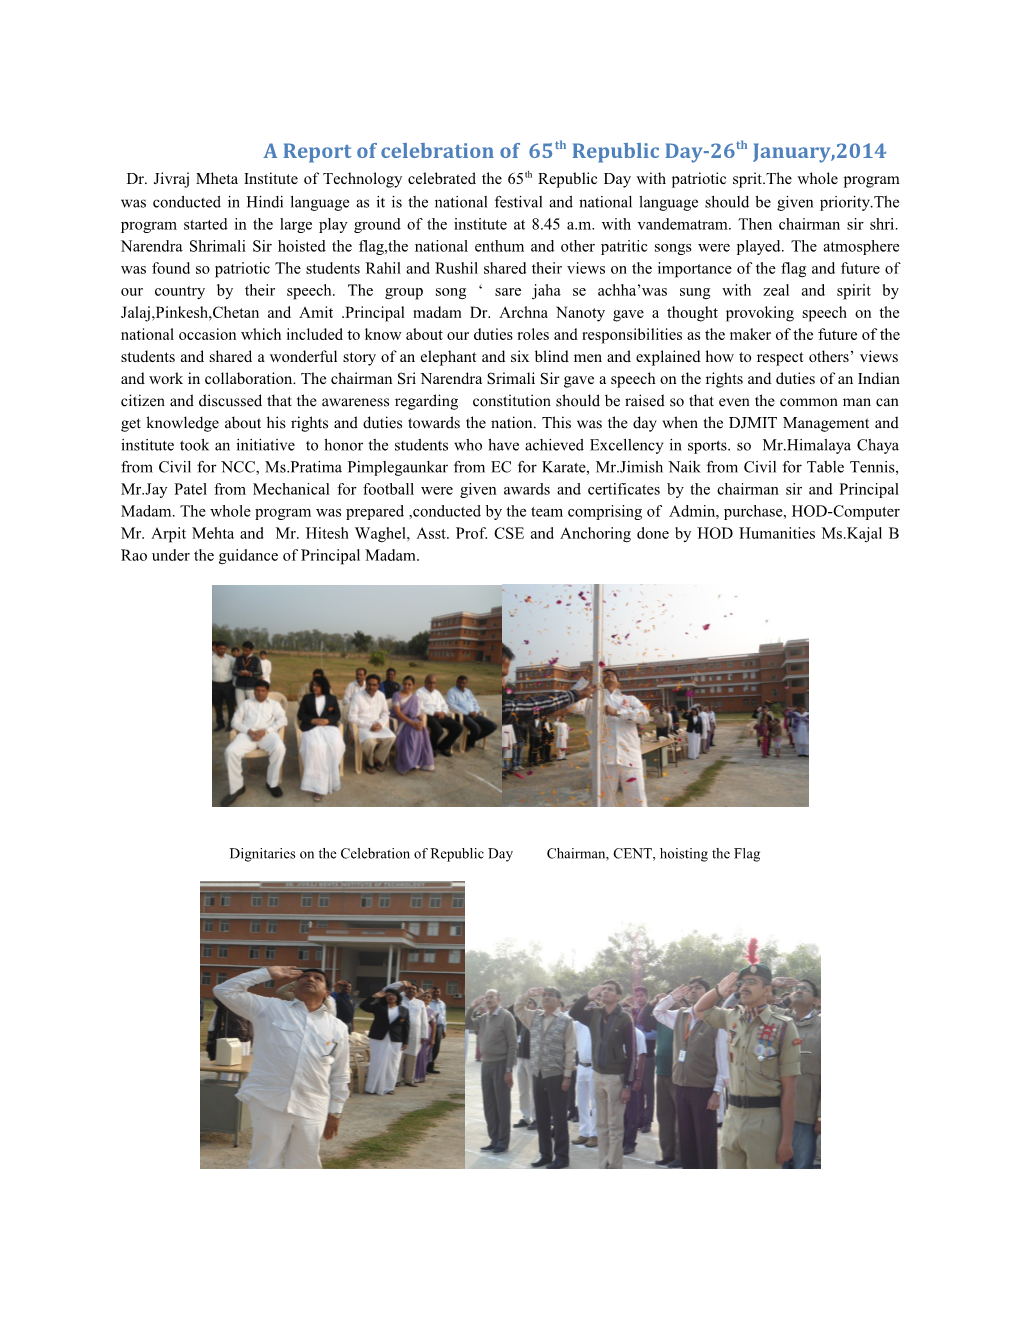 A Report of Celebration of 65Th Republic Day-26Th January,2014